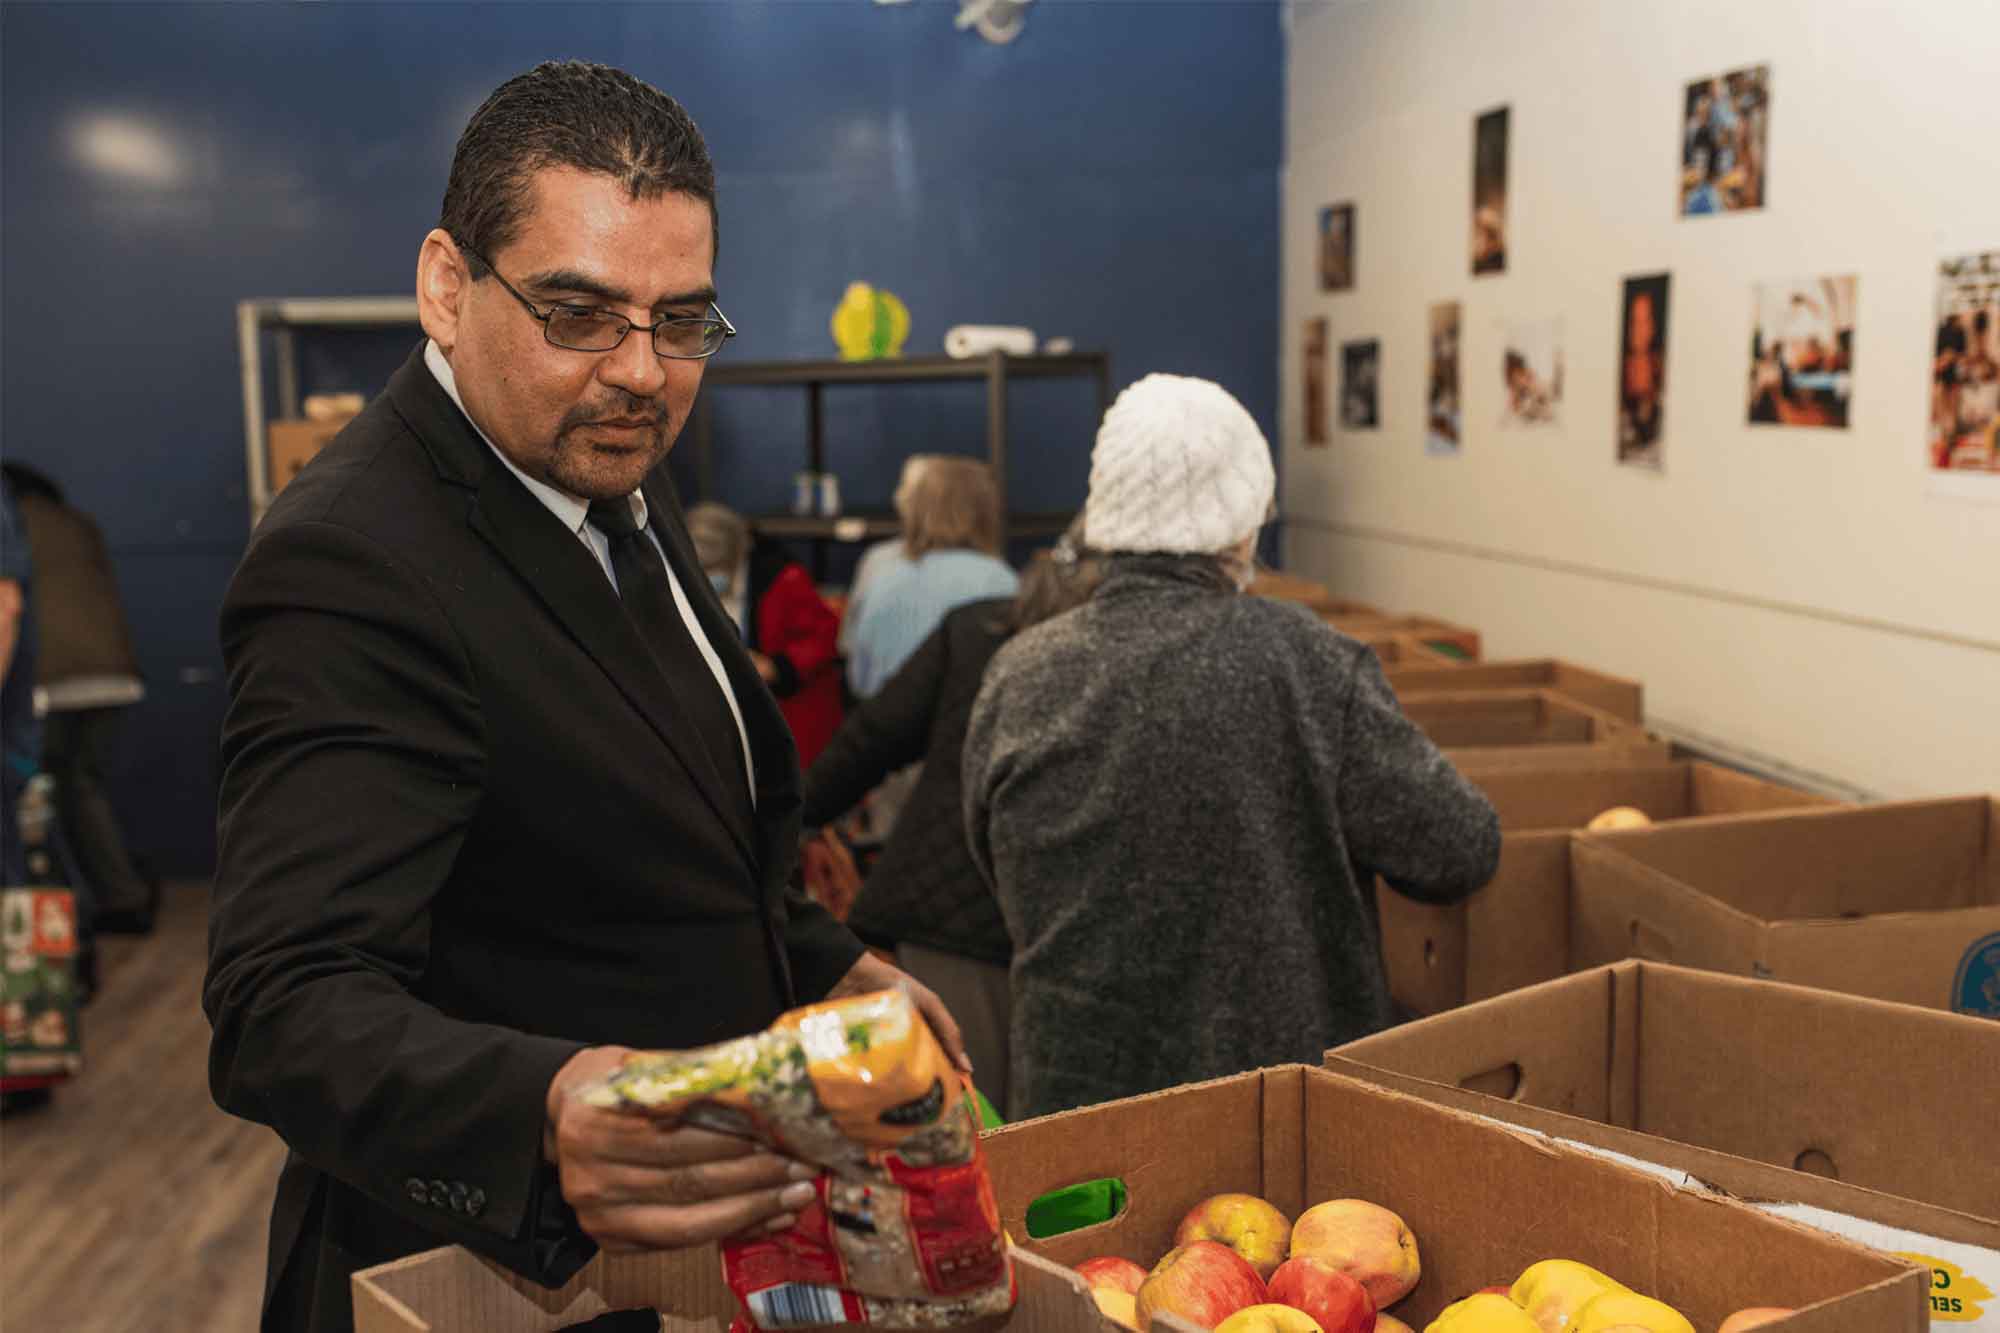 Robert Frederiksen selects food at The Salvation Army White Center Corps food pantry.